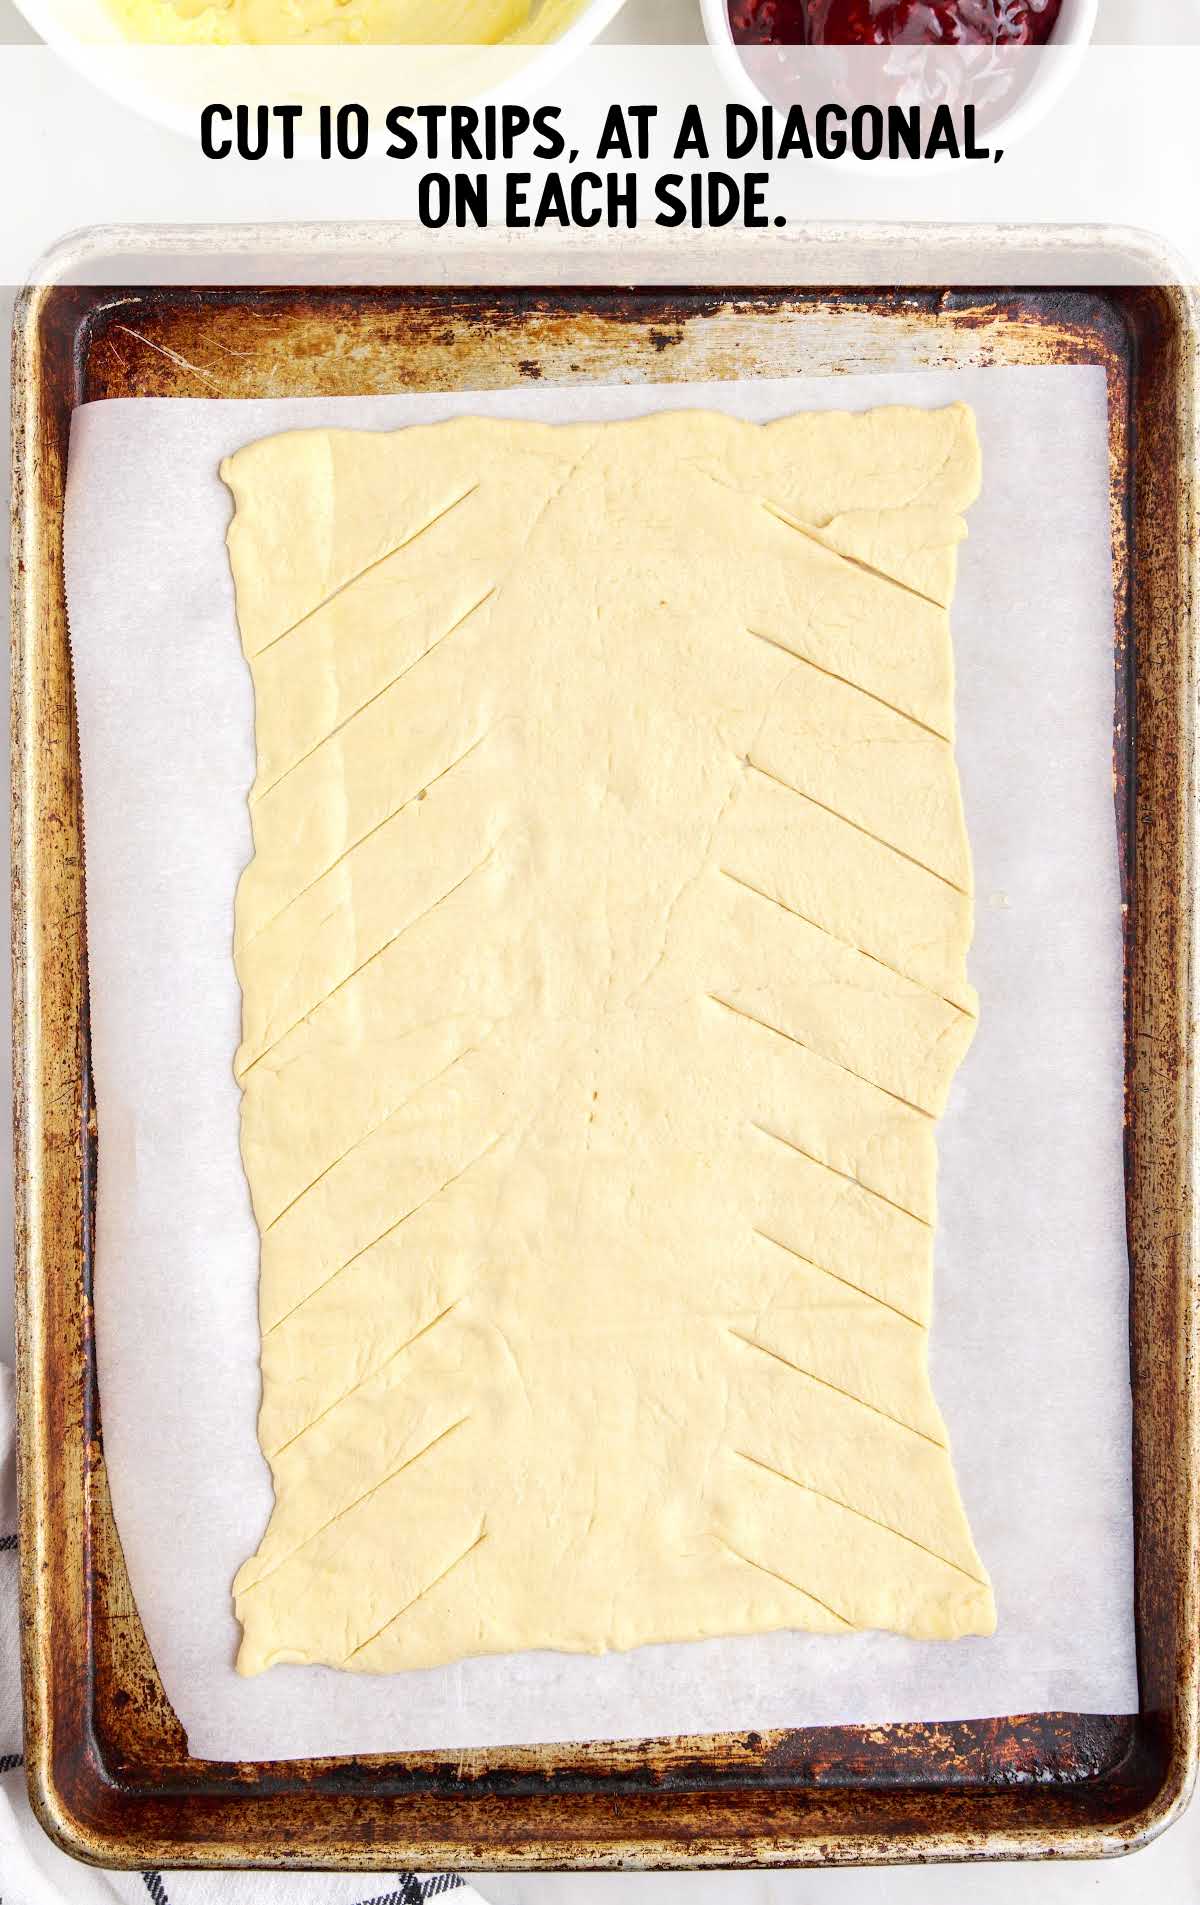 strips cut at a diagonal on each side in a baking dish